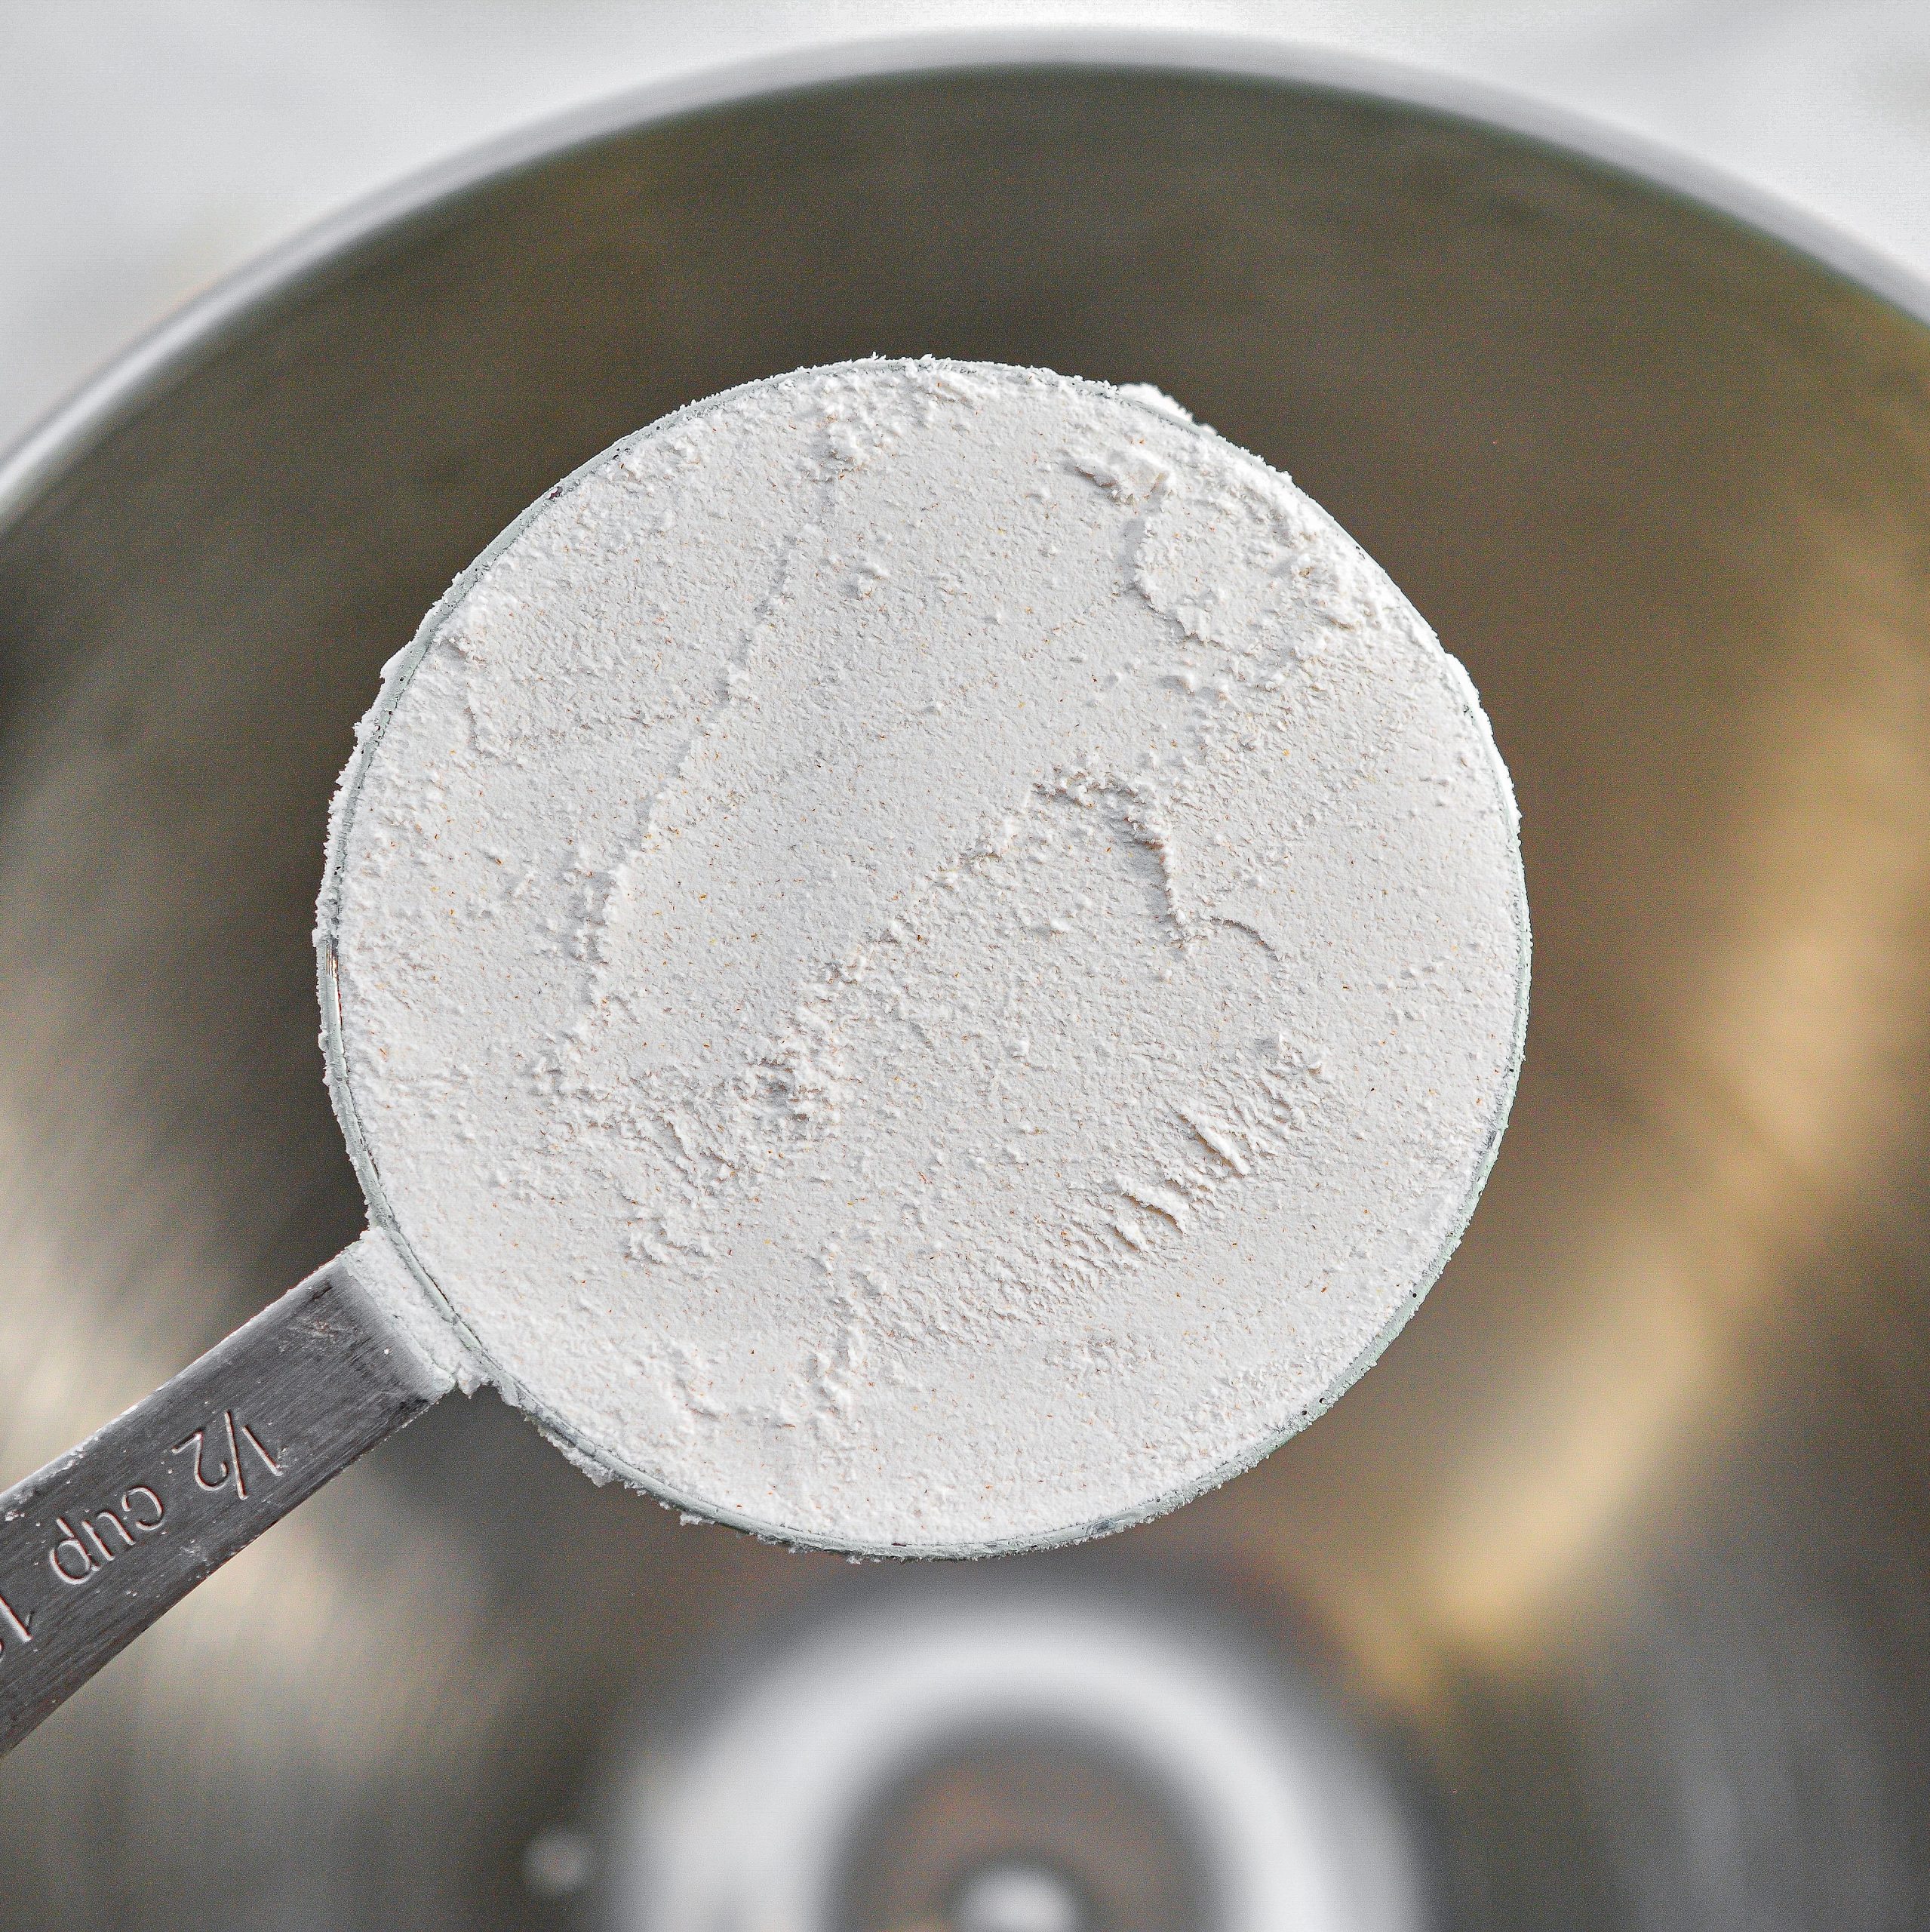 In a mixing bowl, start by adding 2 cups All purpose flour.